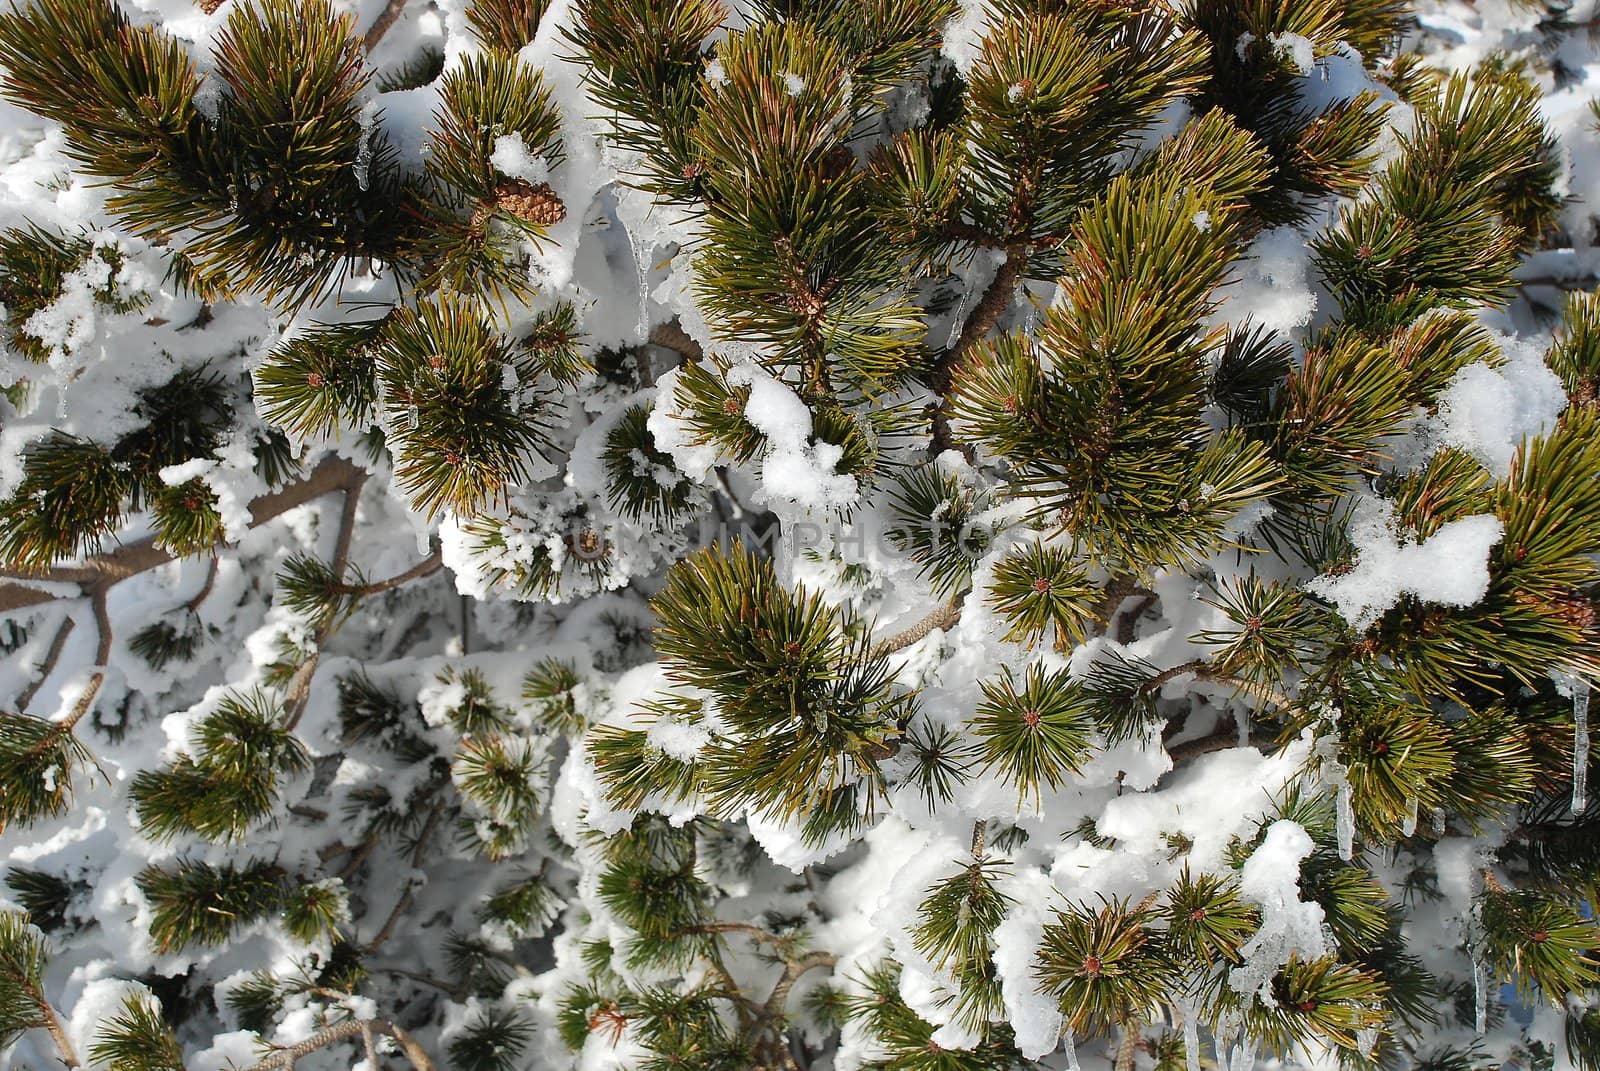 This is a background , so a close-up view of a fir covered by snow. There is many snow but we can see needles and some fir-cones.